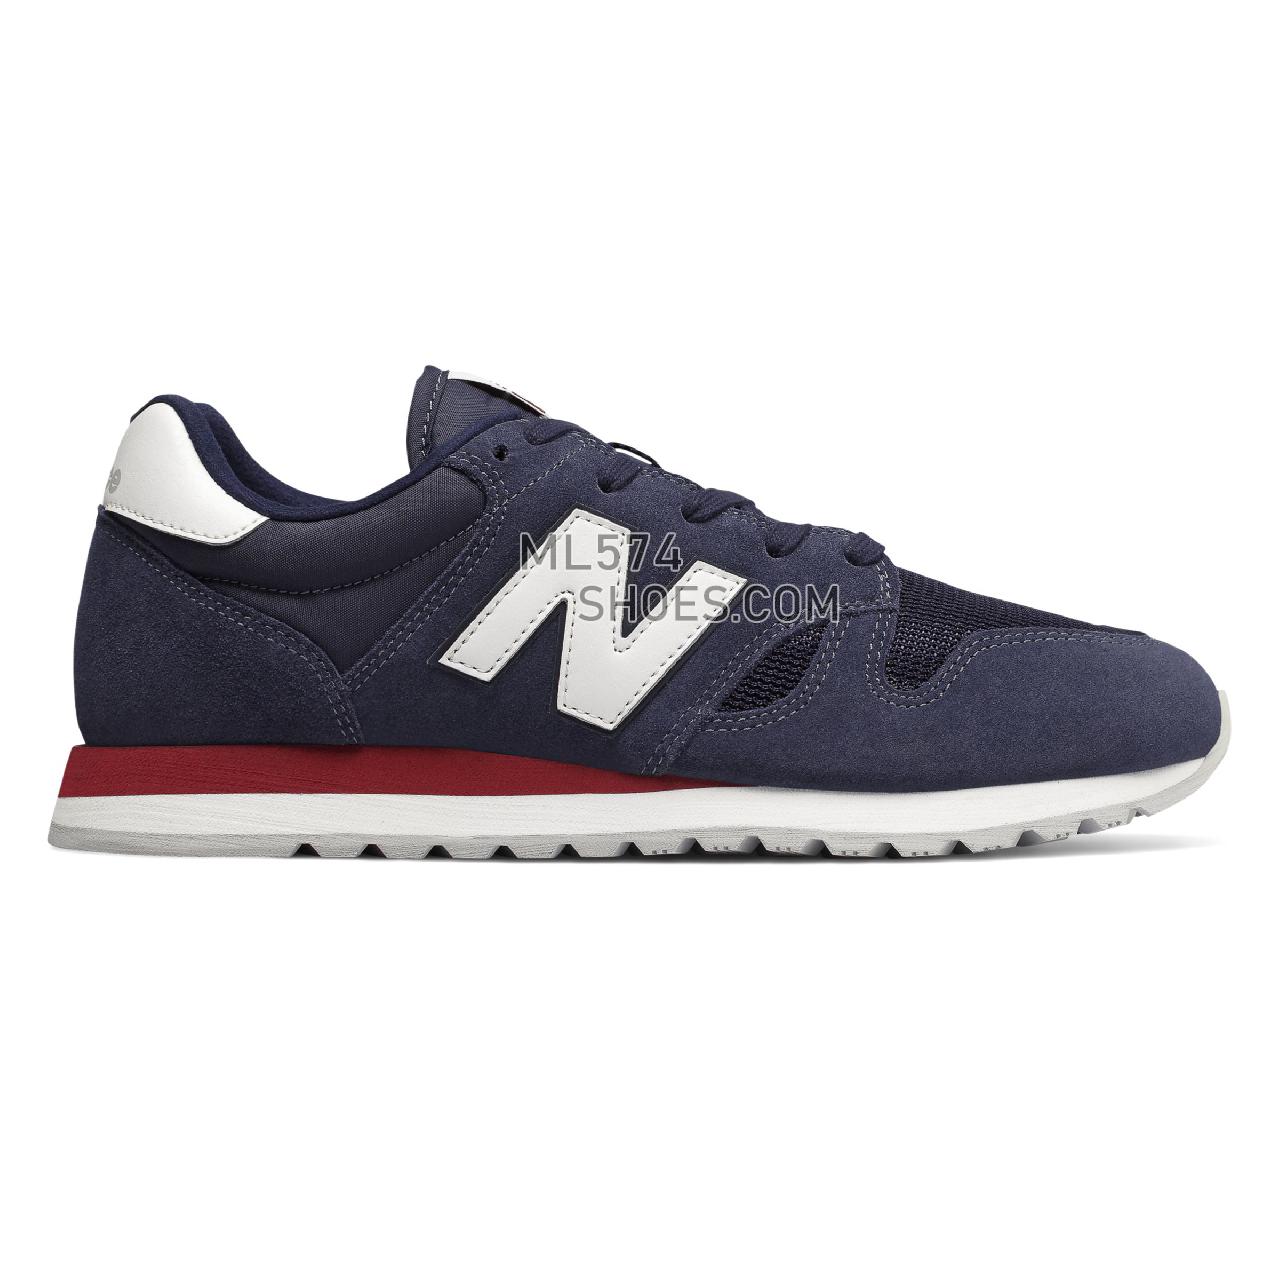 New Balance 520 - Men's Classic Sneakers - Navy with White - U520GG